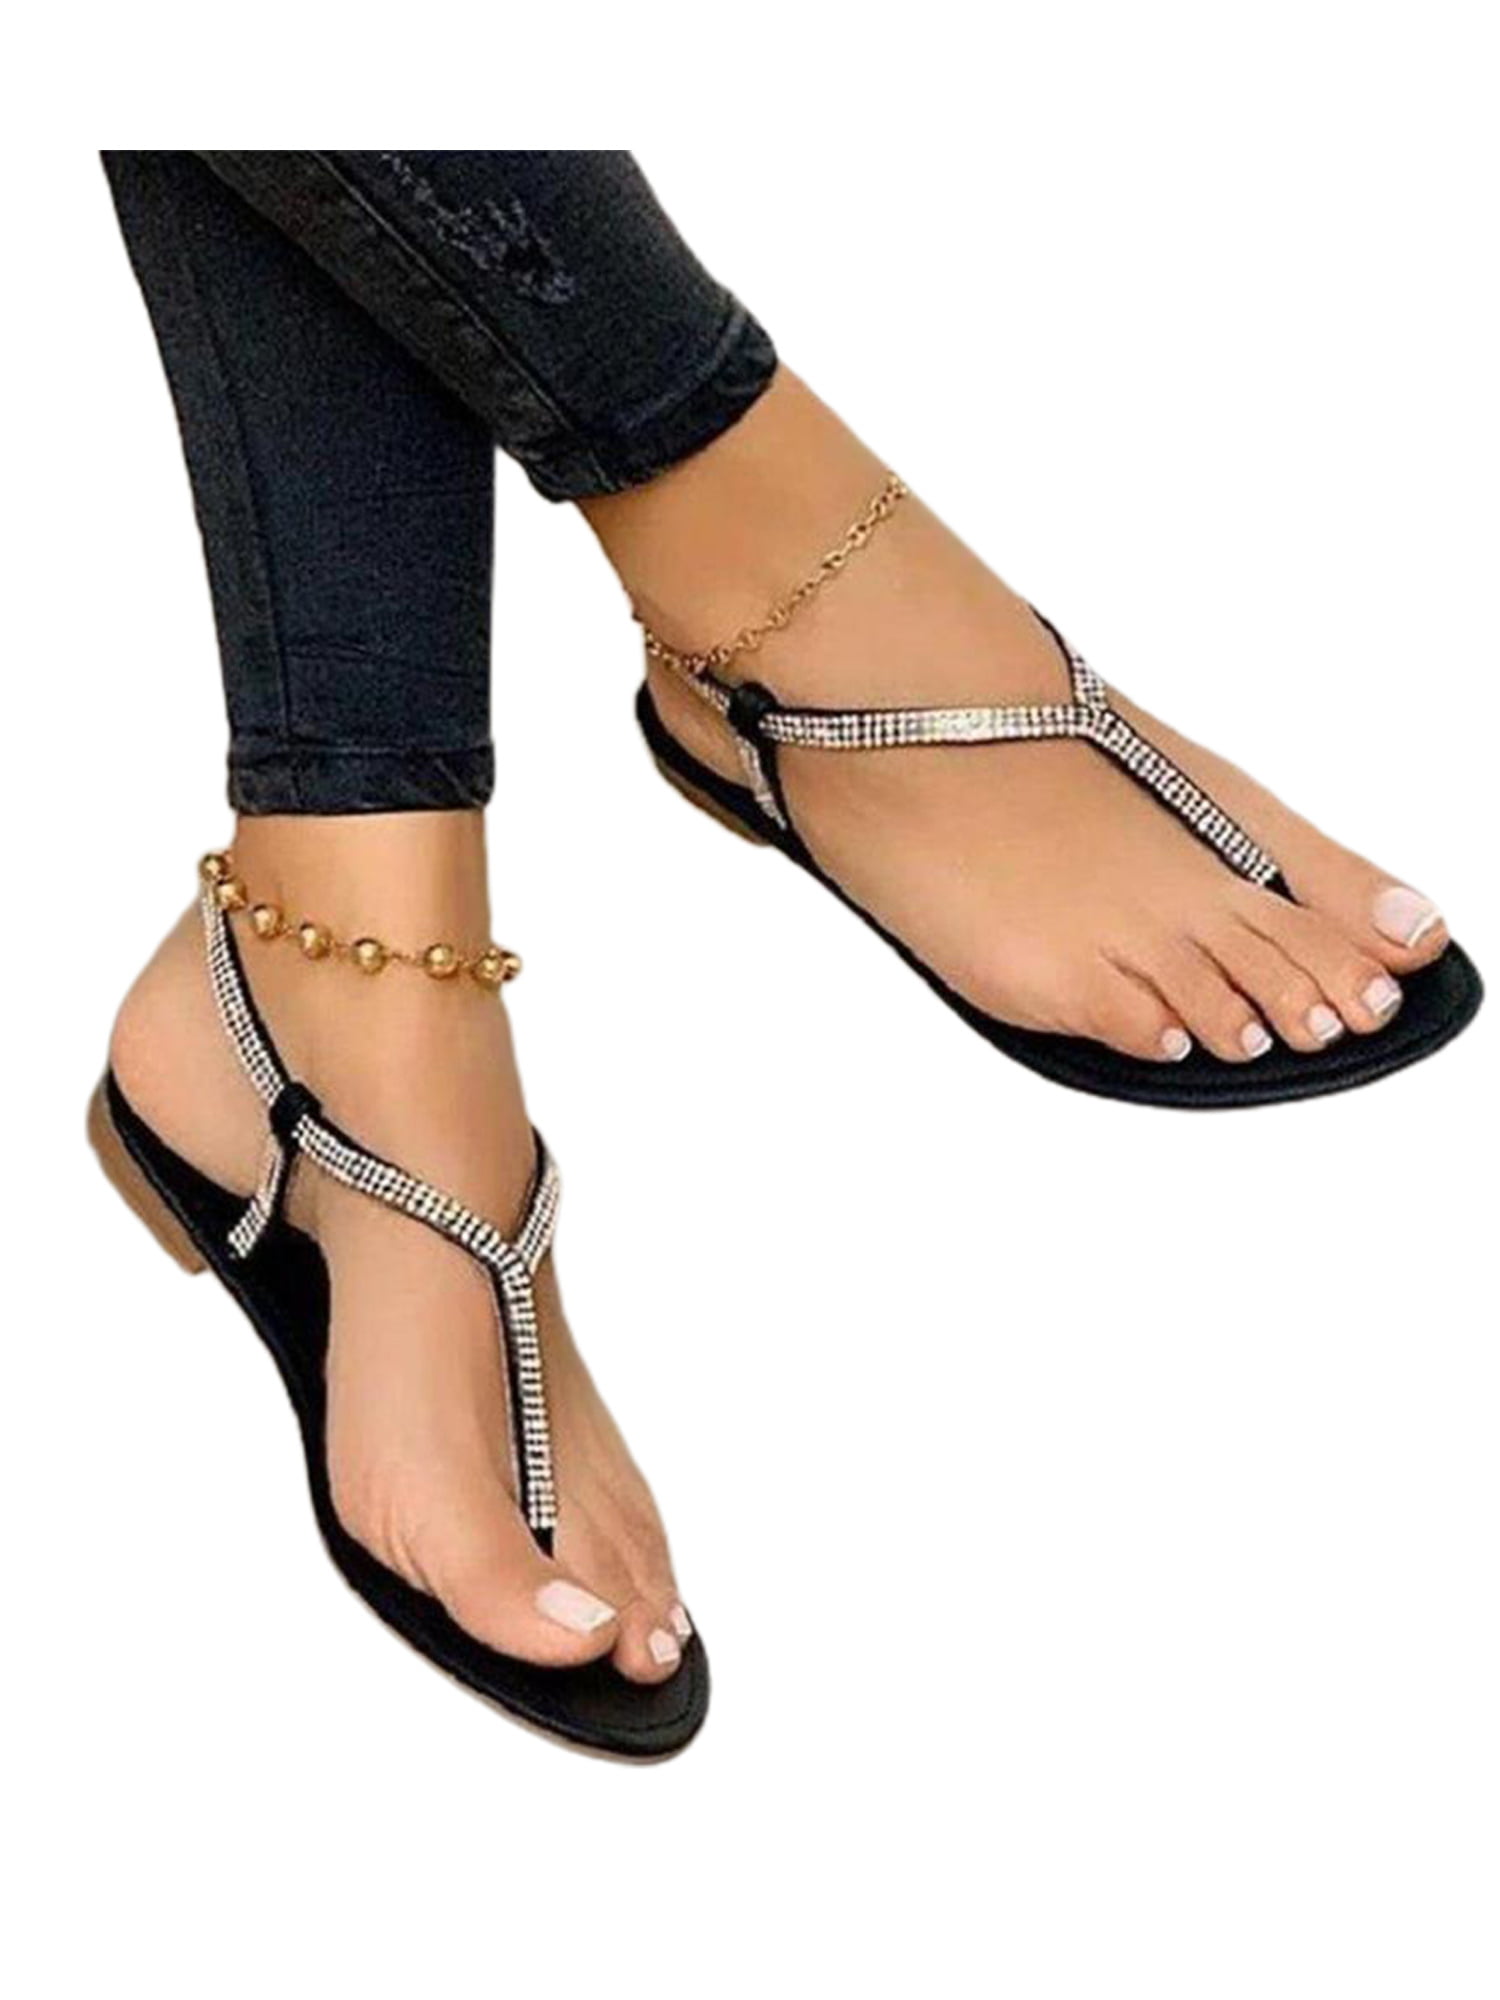 Women Flat Sandals Diamante Toe Post Ankle Strap Shoes Holiday Summer Party Size